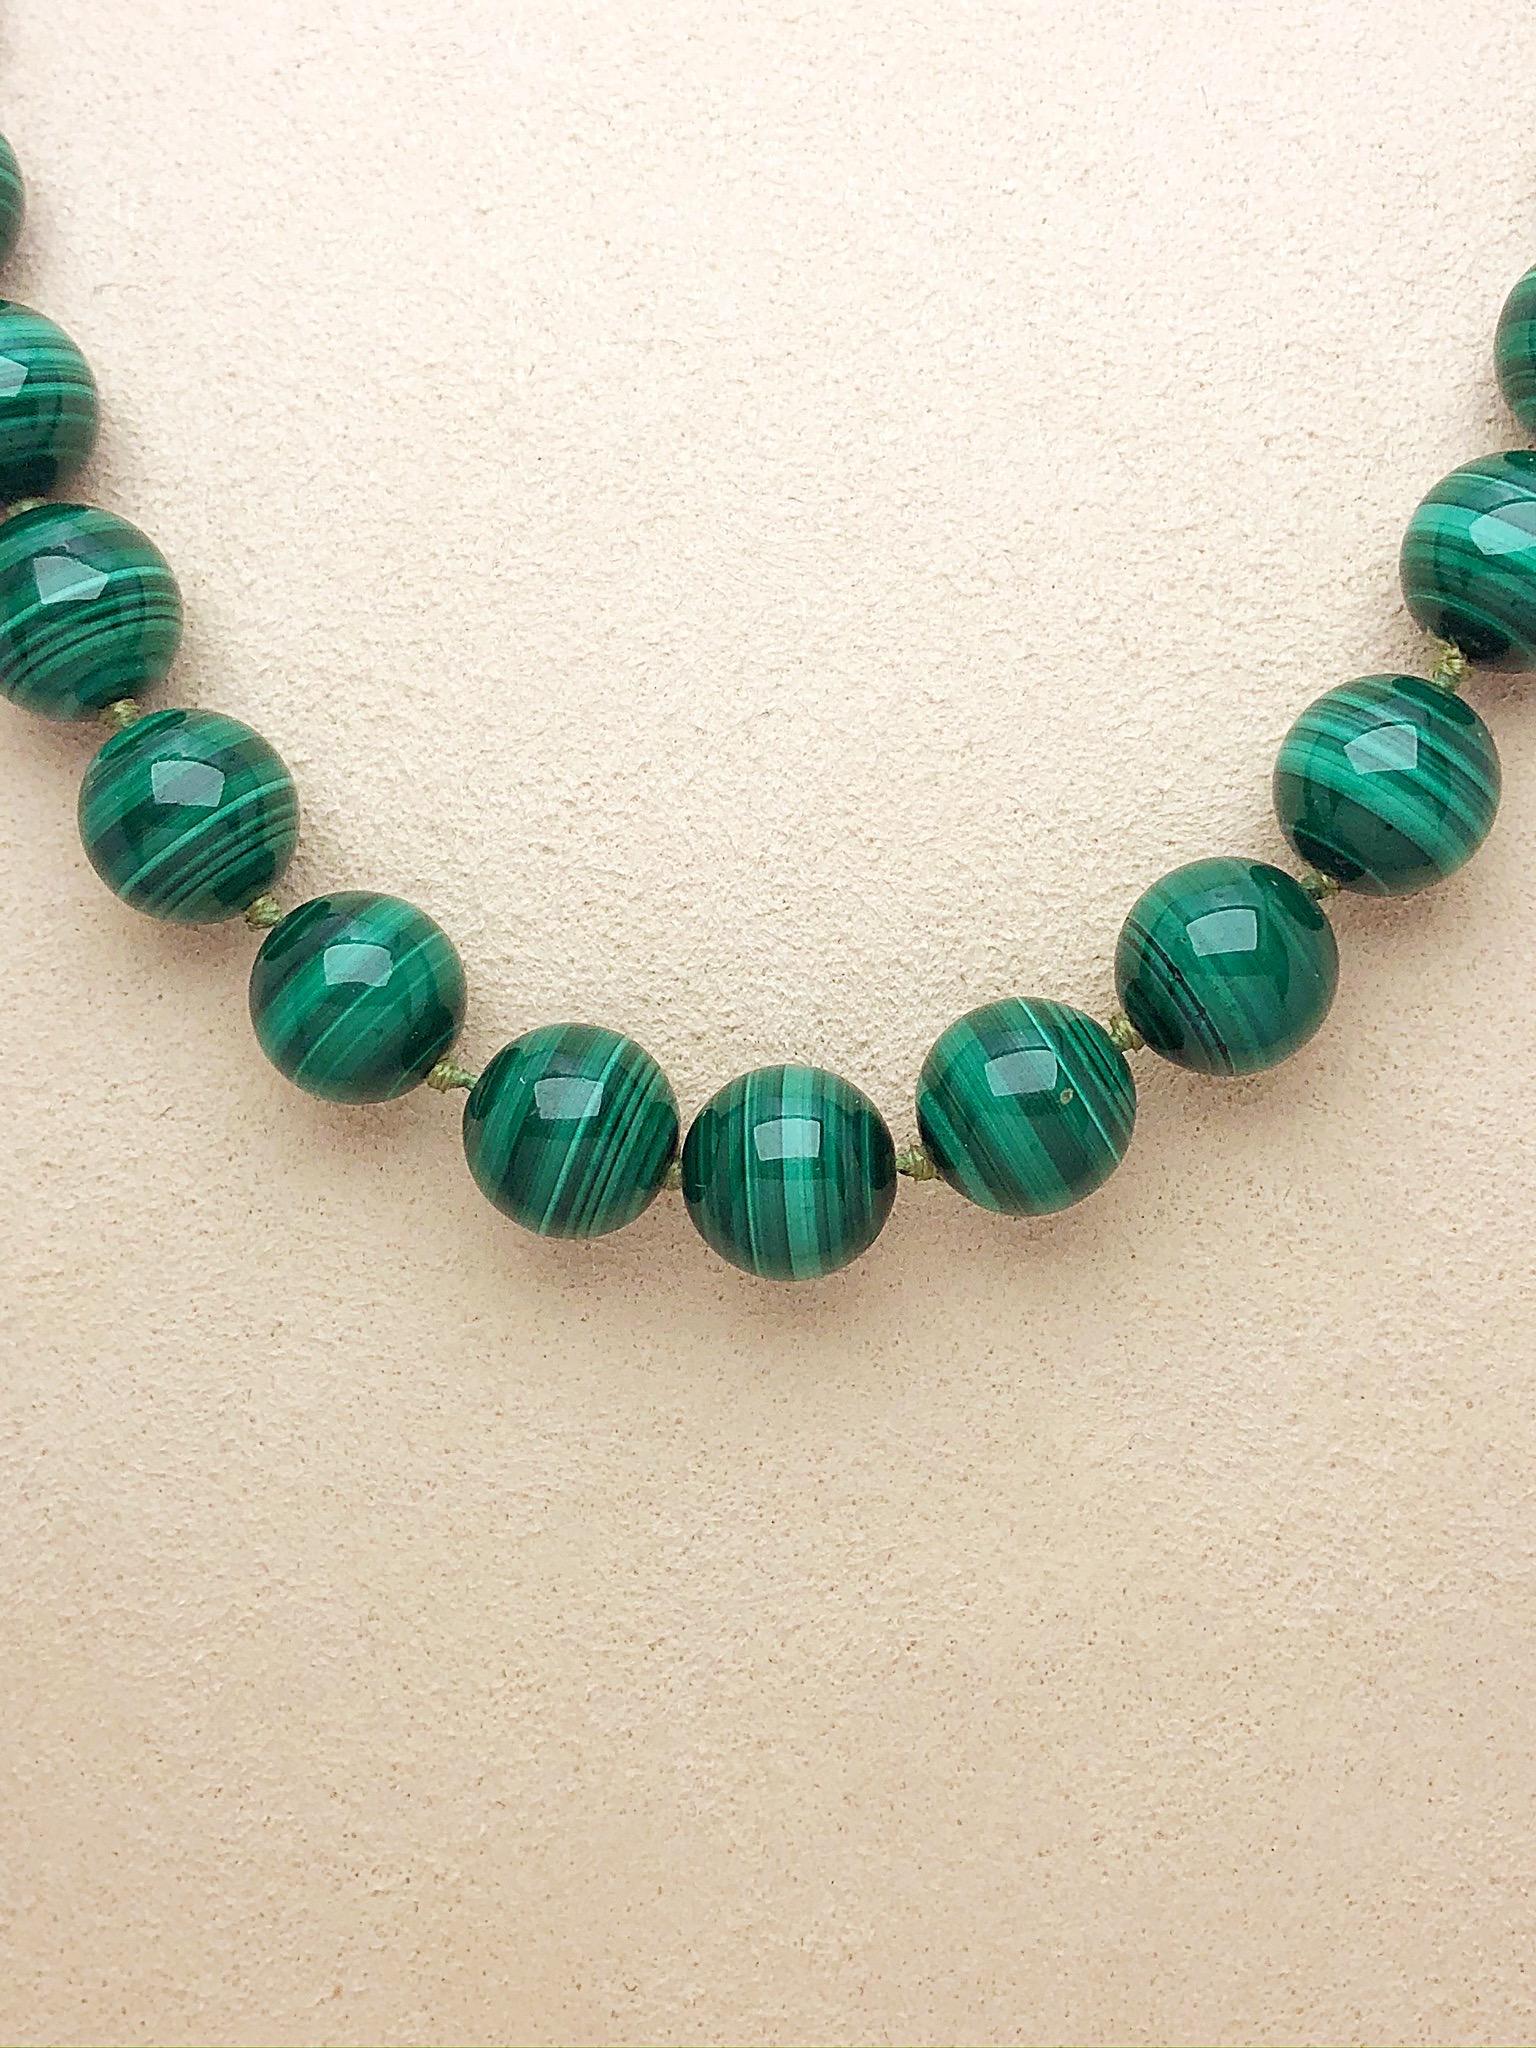 Throw on this chic malachite beaded necklace for an updated casual, cool fashion statement. 
50 perfectly matched malachite beads, measuring 12mm each, are adorned by a showstopping oval 14kt yellow gold and malachite clasp. 
The necklace measures